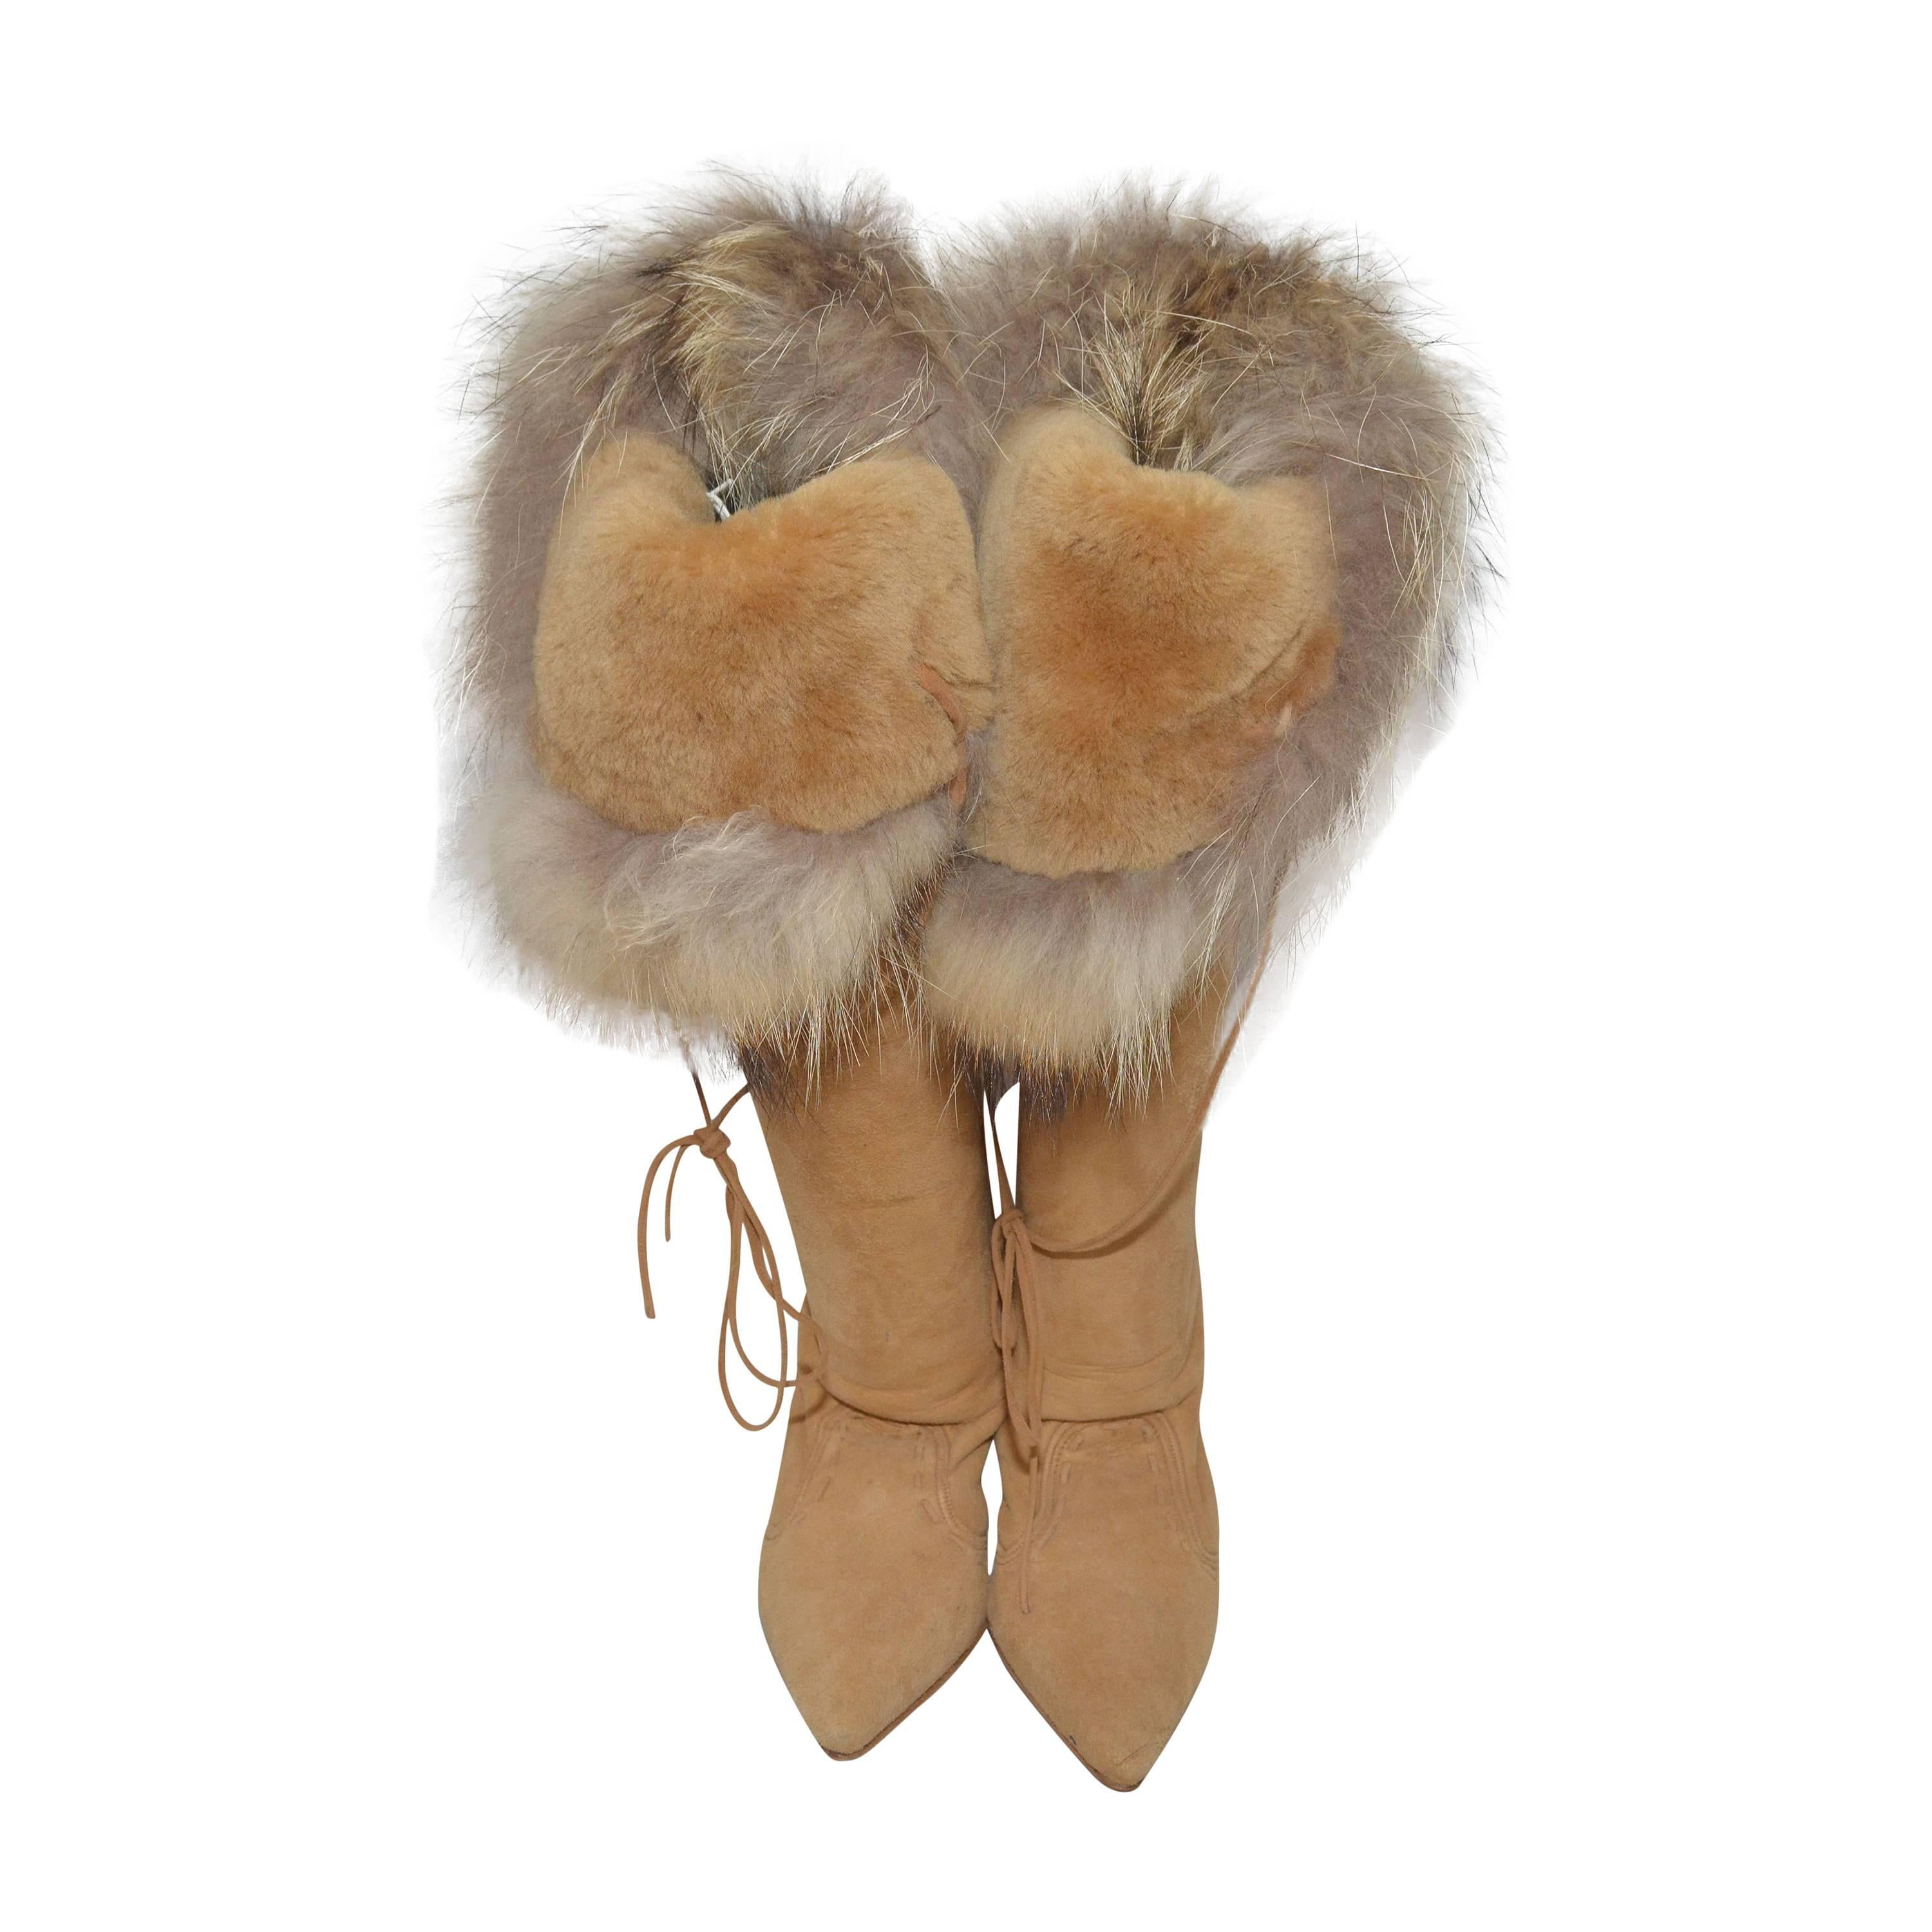 Manolo Blahnik boots have a shearling lining and Fox trim at top of boot, fully lined, and a wood-stacked heel. Can be worn folded down or over the knee. Heels measure approximately 3 inches. Floor to front top of the boots is 21